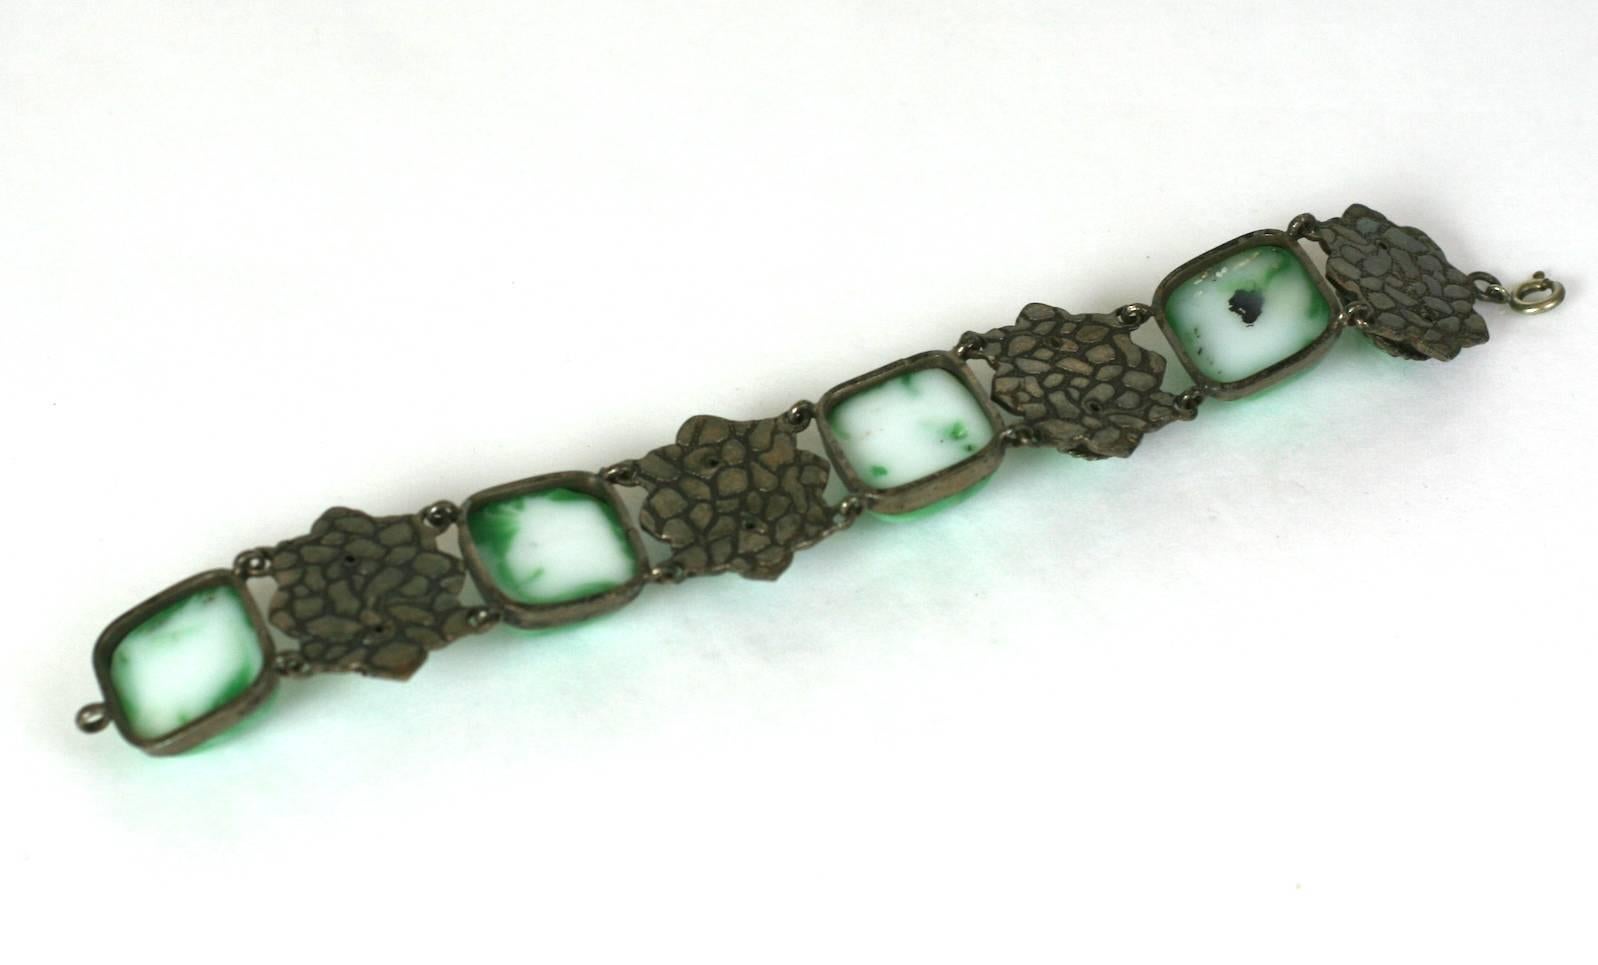  French Victorian Revival Bracelet In Good Condition For Sale In New York, NY